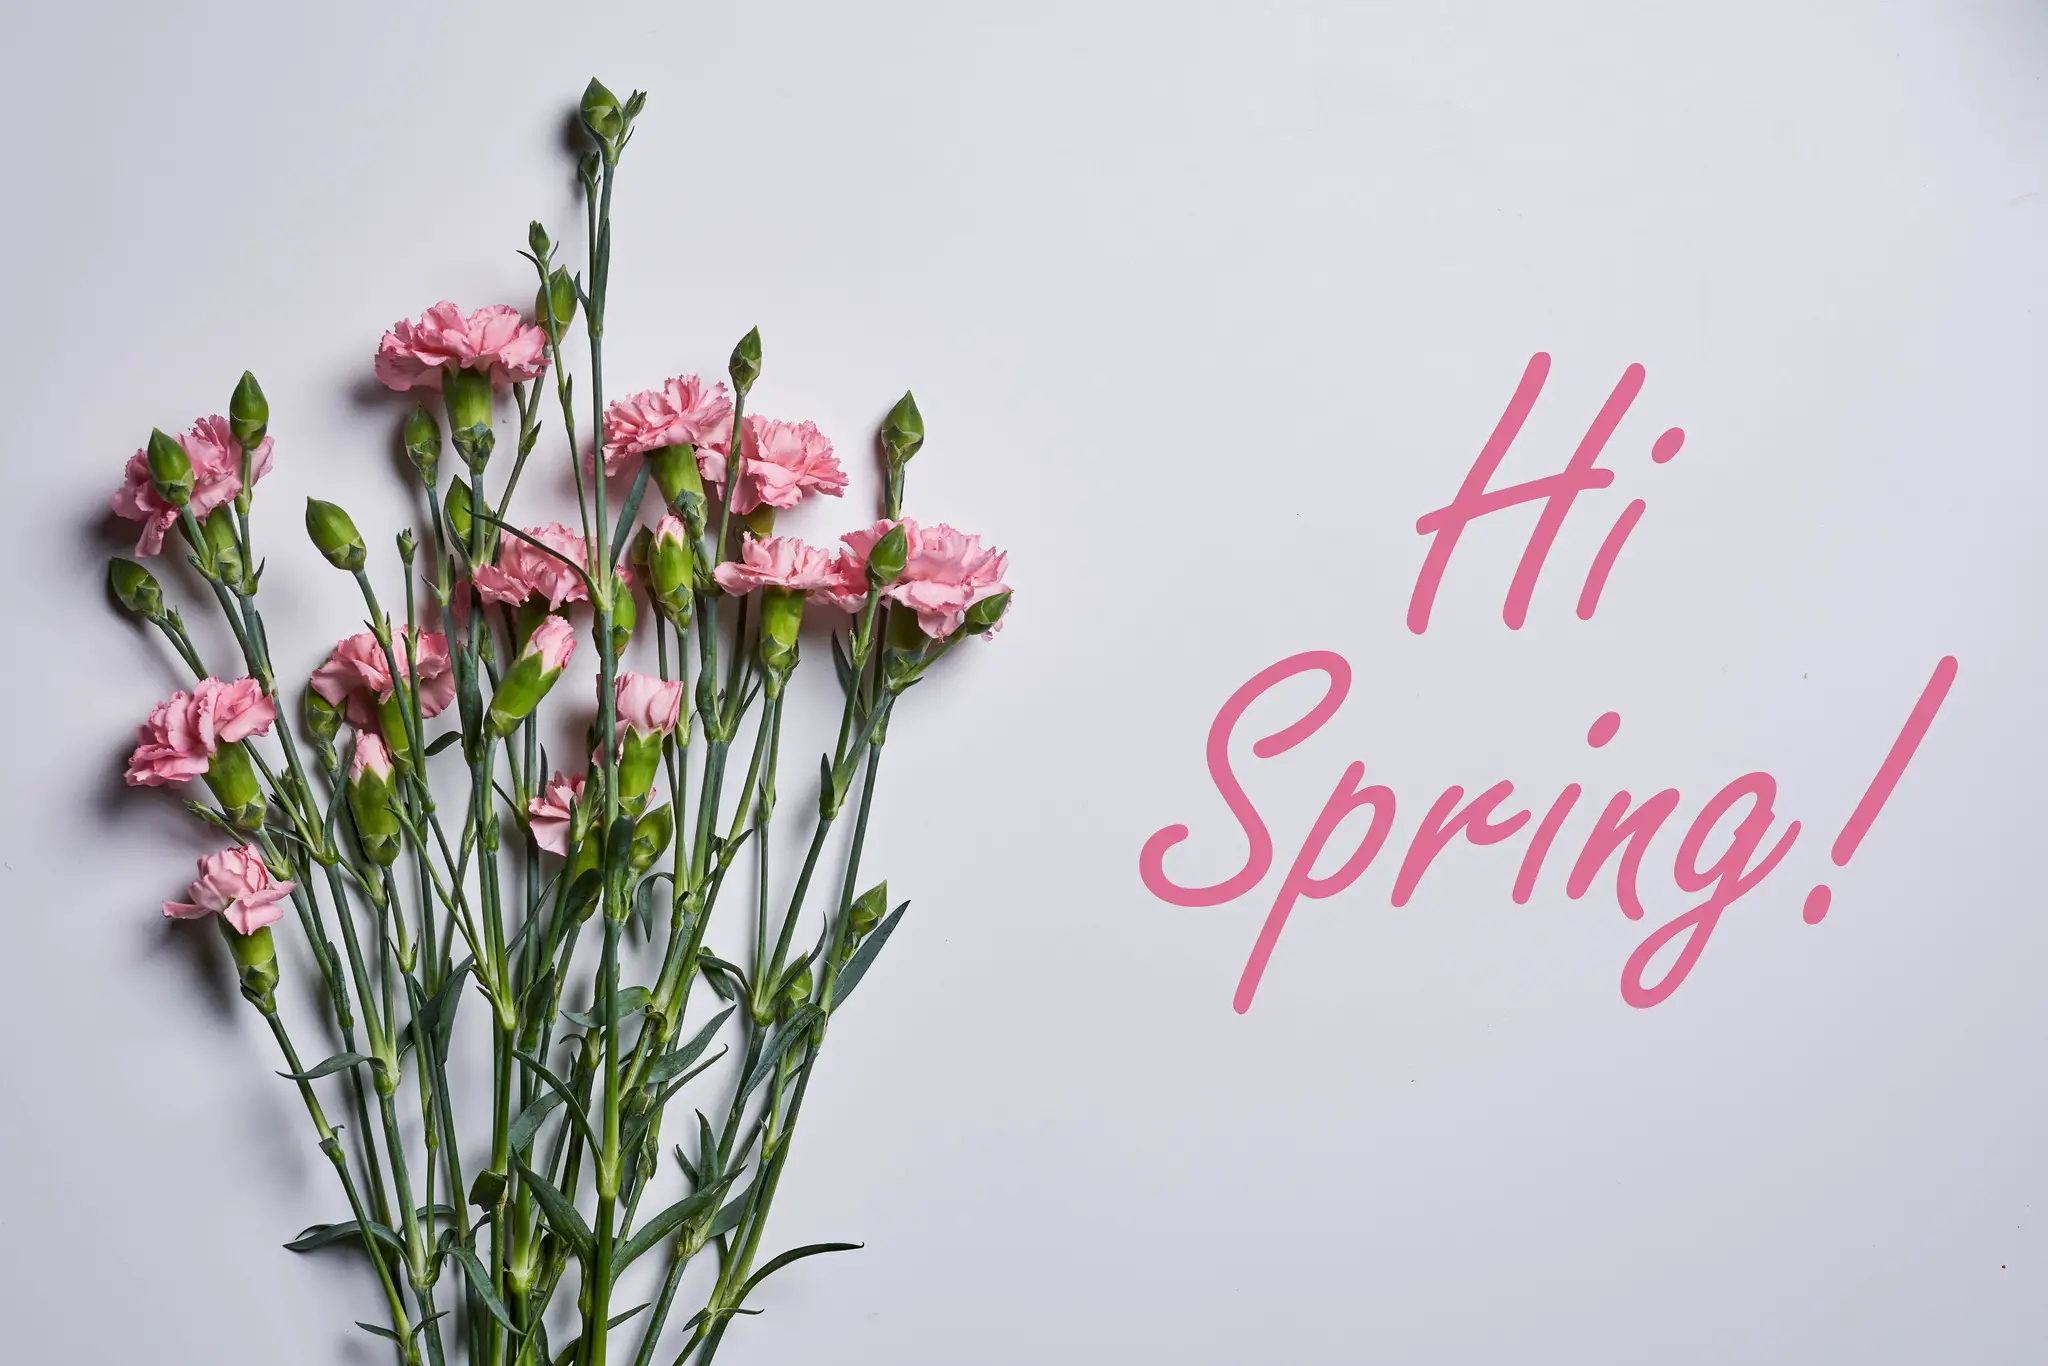 40 Hello March Quotes To Welcome The Spring Season